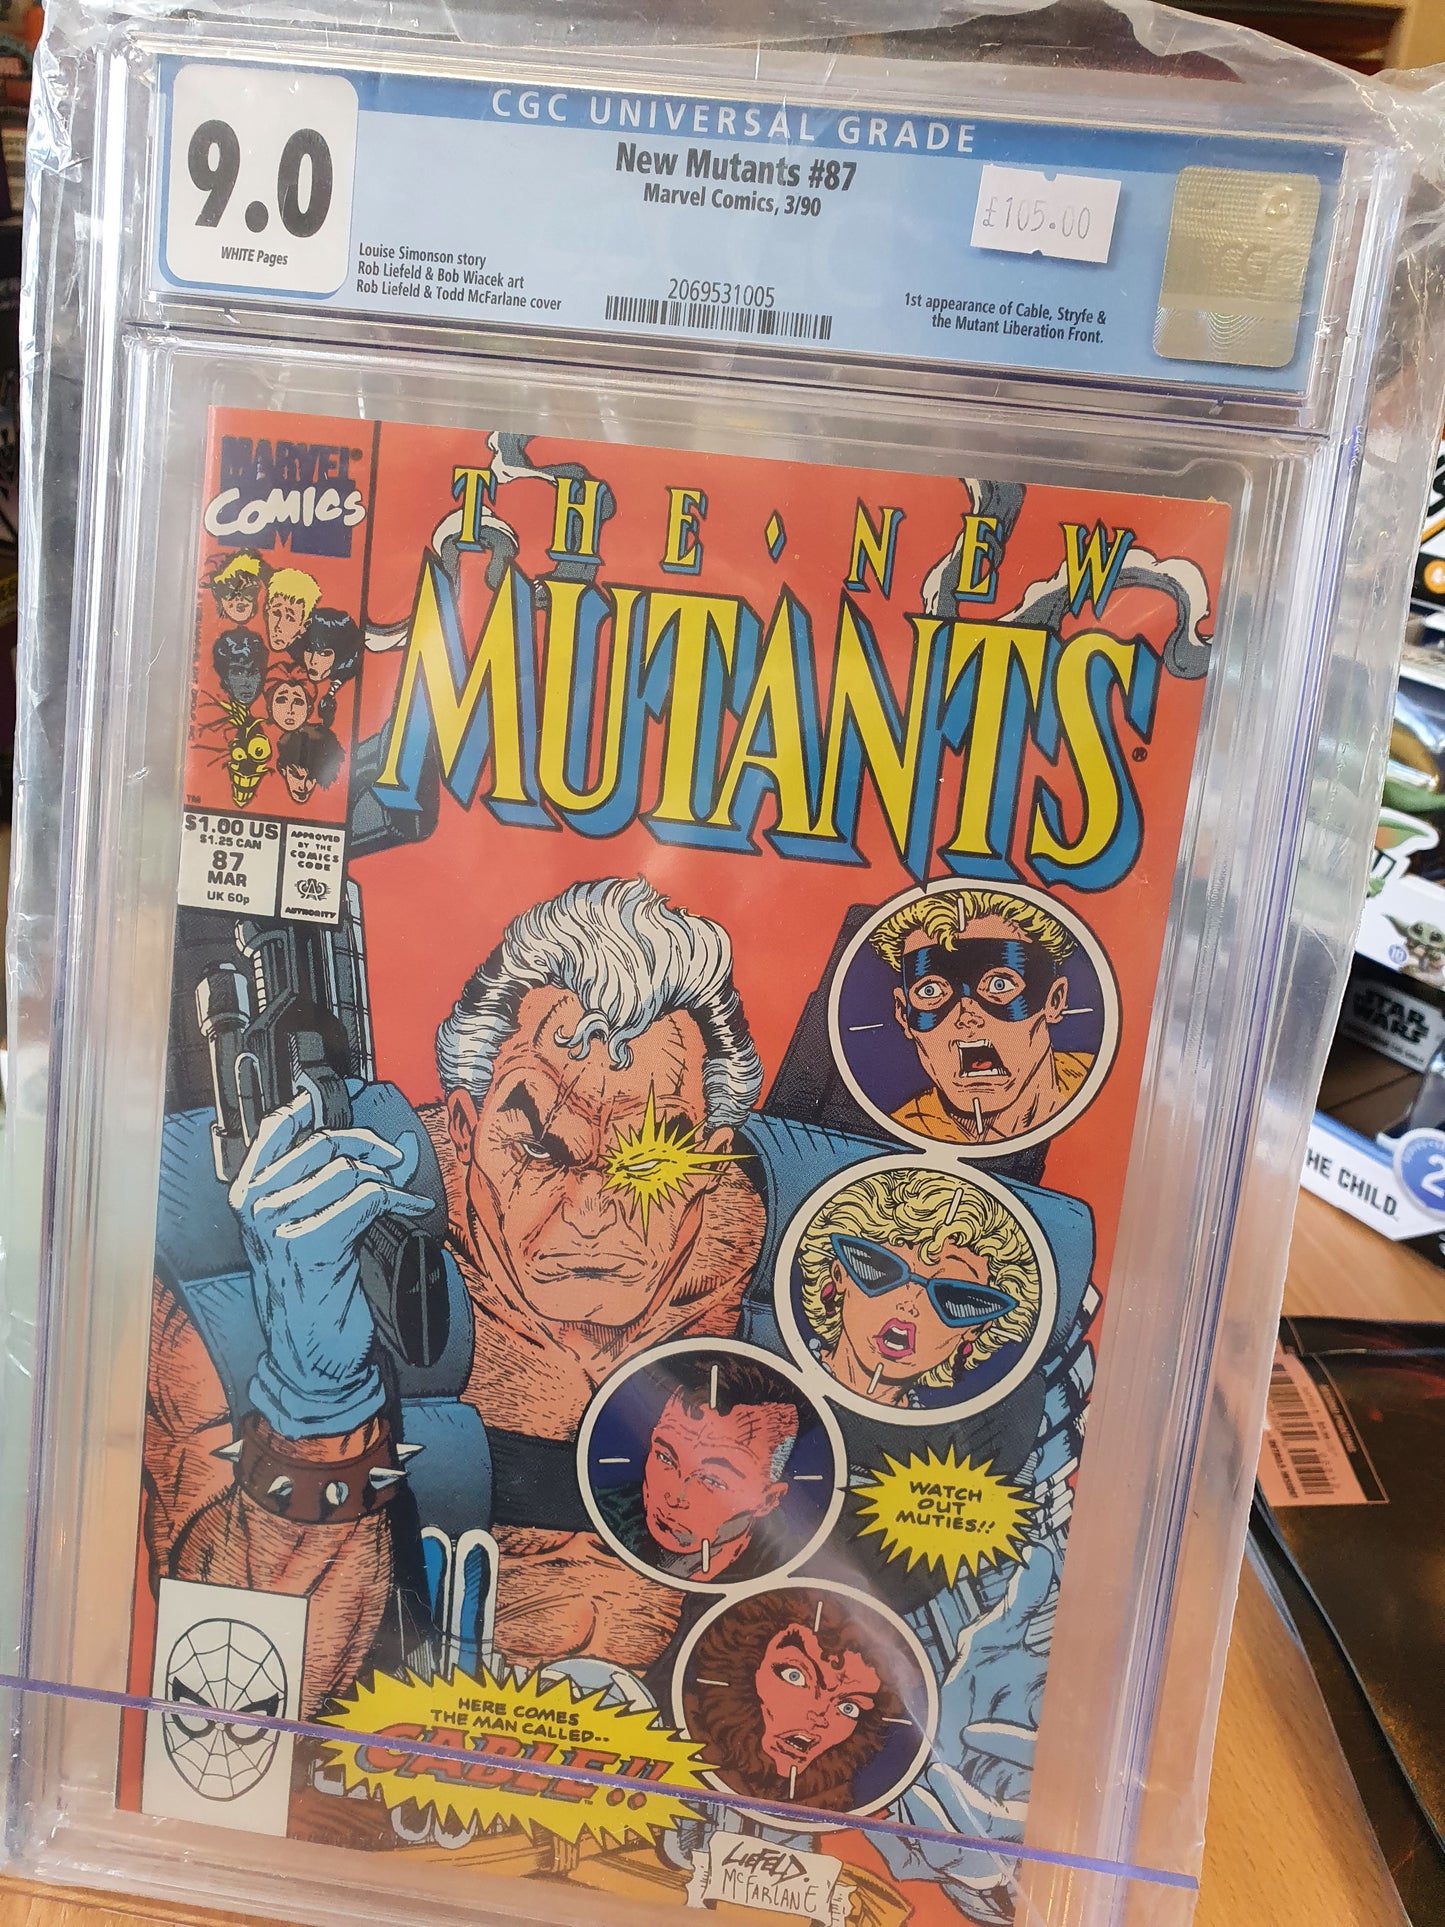 NEW MUTANTS #87 - CGC Graded 9.0 - 1st appearance CABLE, STRYFE AND MUTANT LIBERATION FRONT